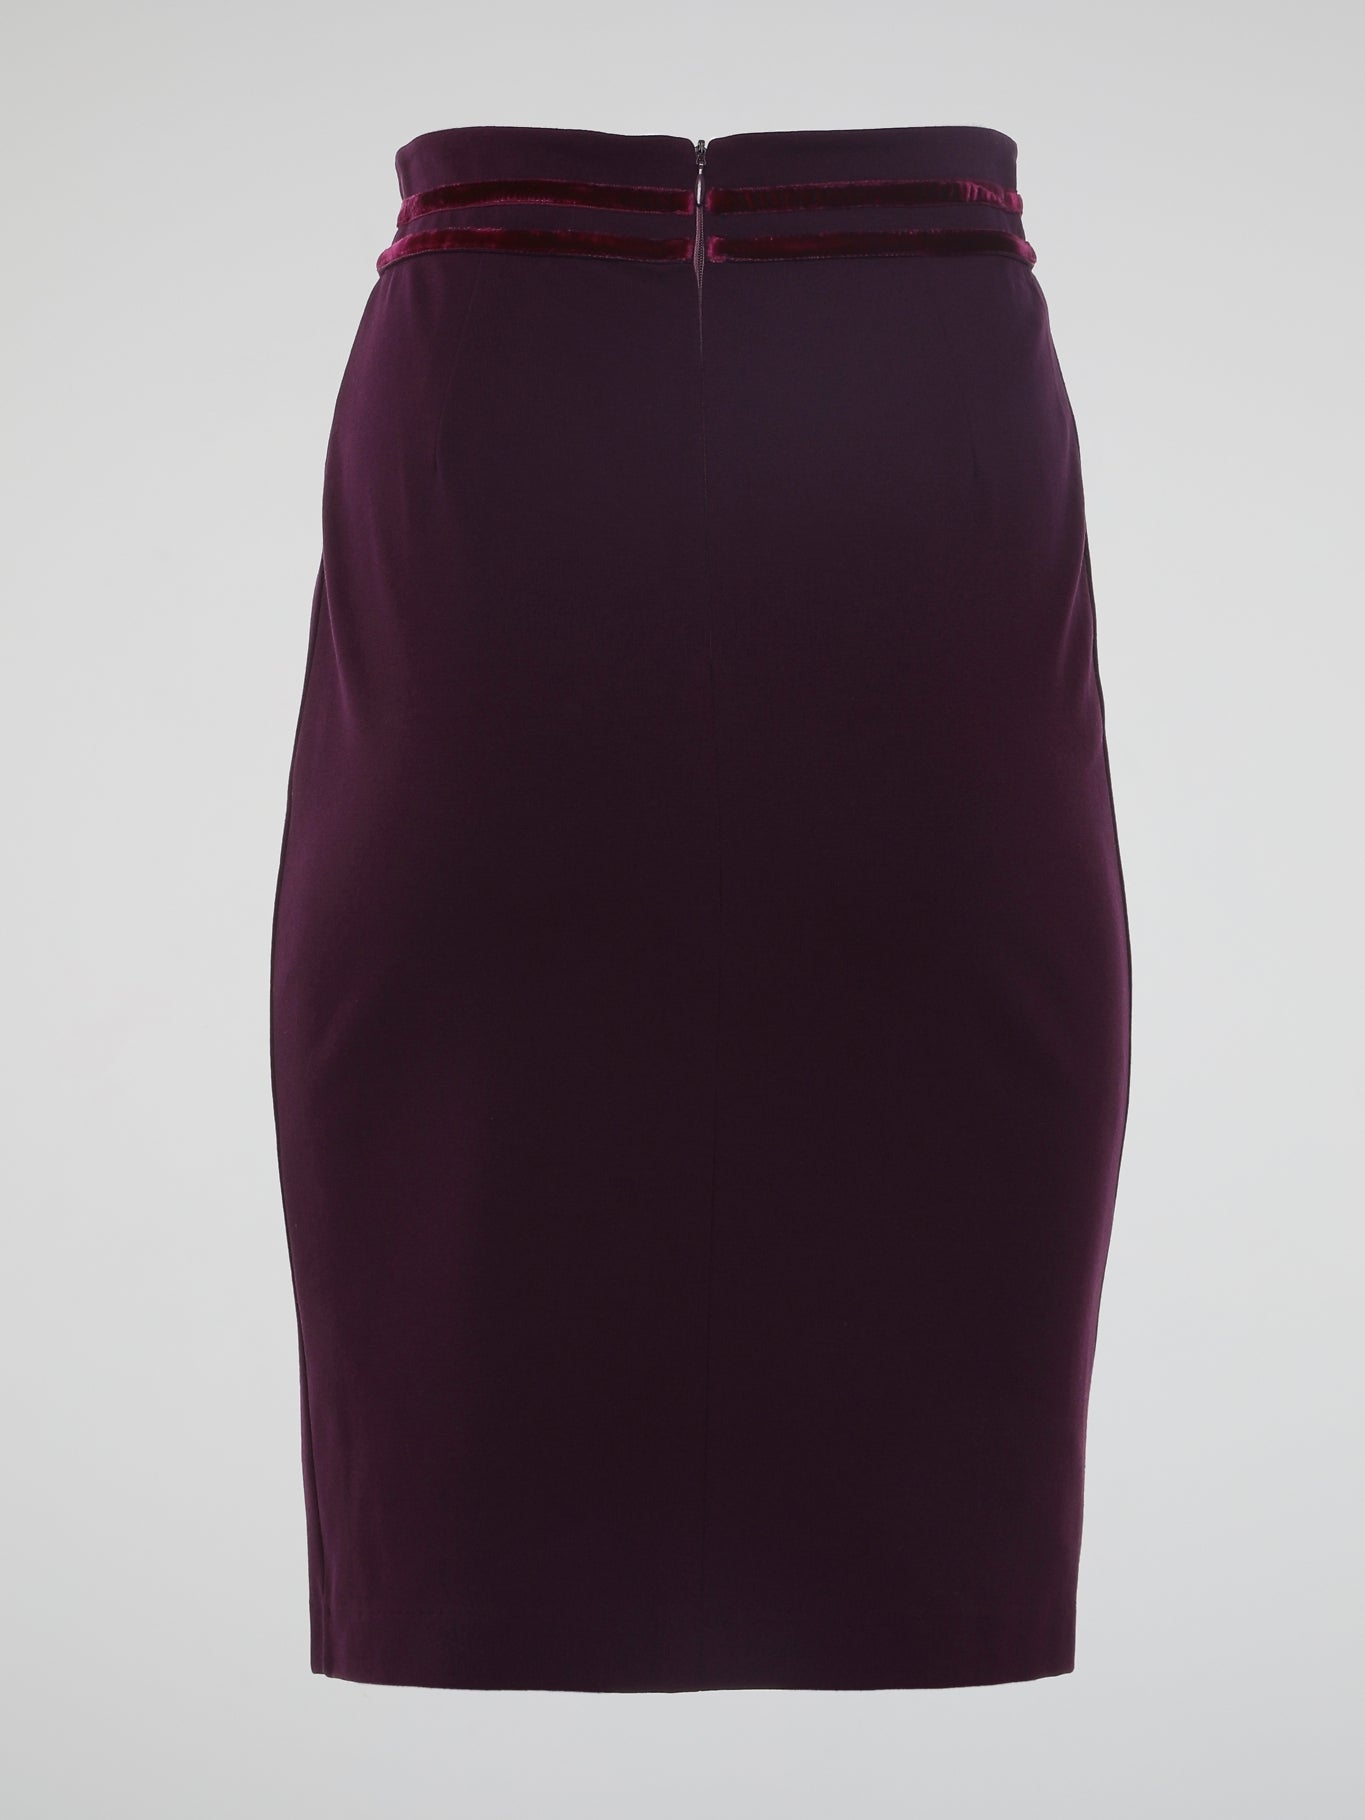 Introducing the Burgundy Draped Skirt by Roberto Cavalli, a graceful masterpiece that effortlessly captivates attention. Crafted with meticulous precision, this luxurious skirt embraces the spirit of elegance, featuring cascading layers that dance with every step. Emanate sophistication and allure as you glide across the room, leaving a trail of admiration in your wake.